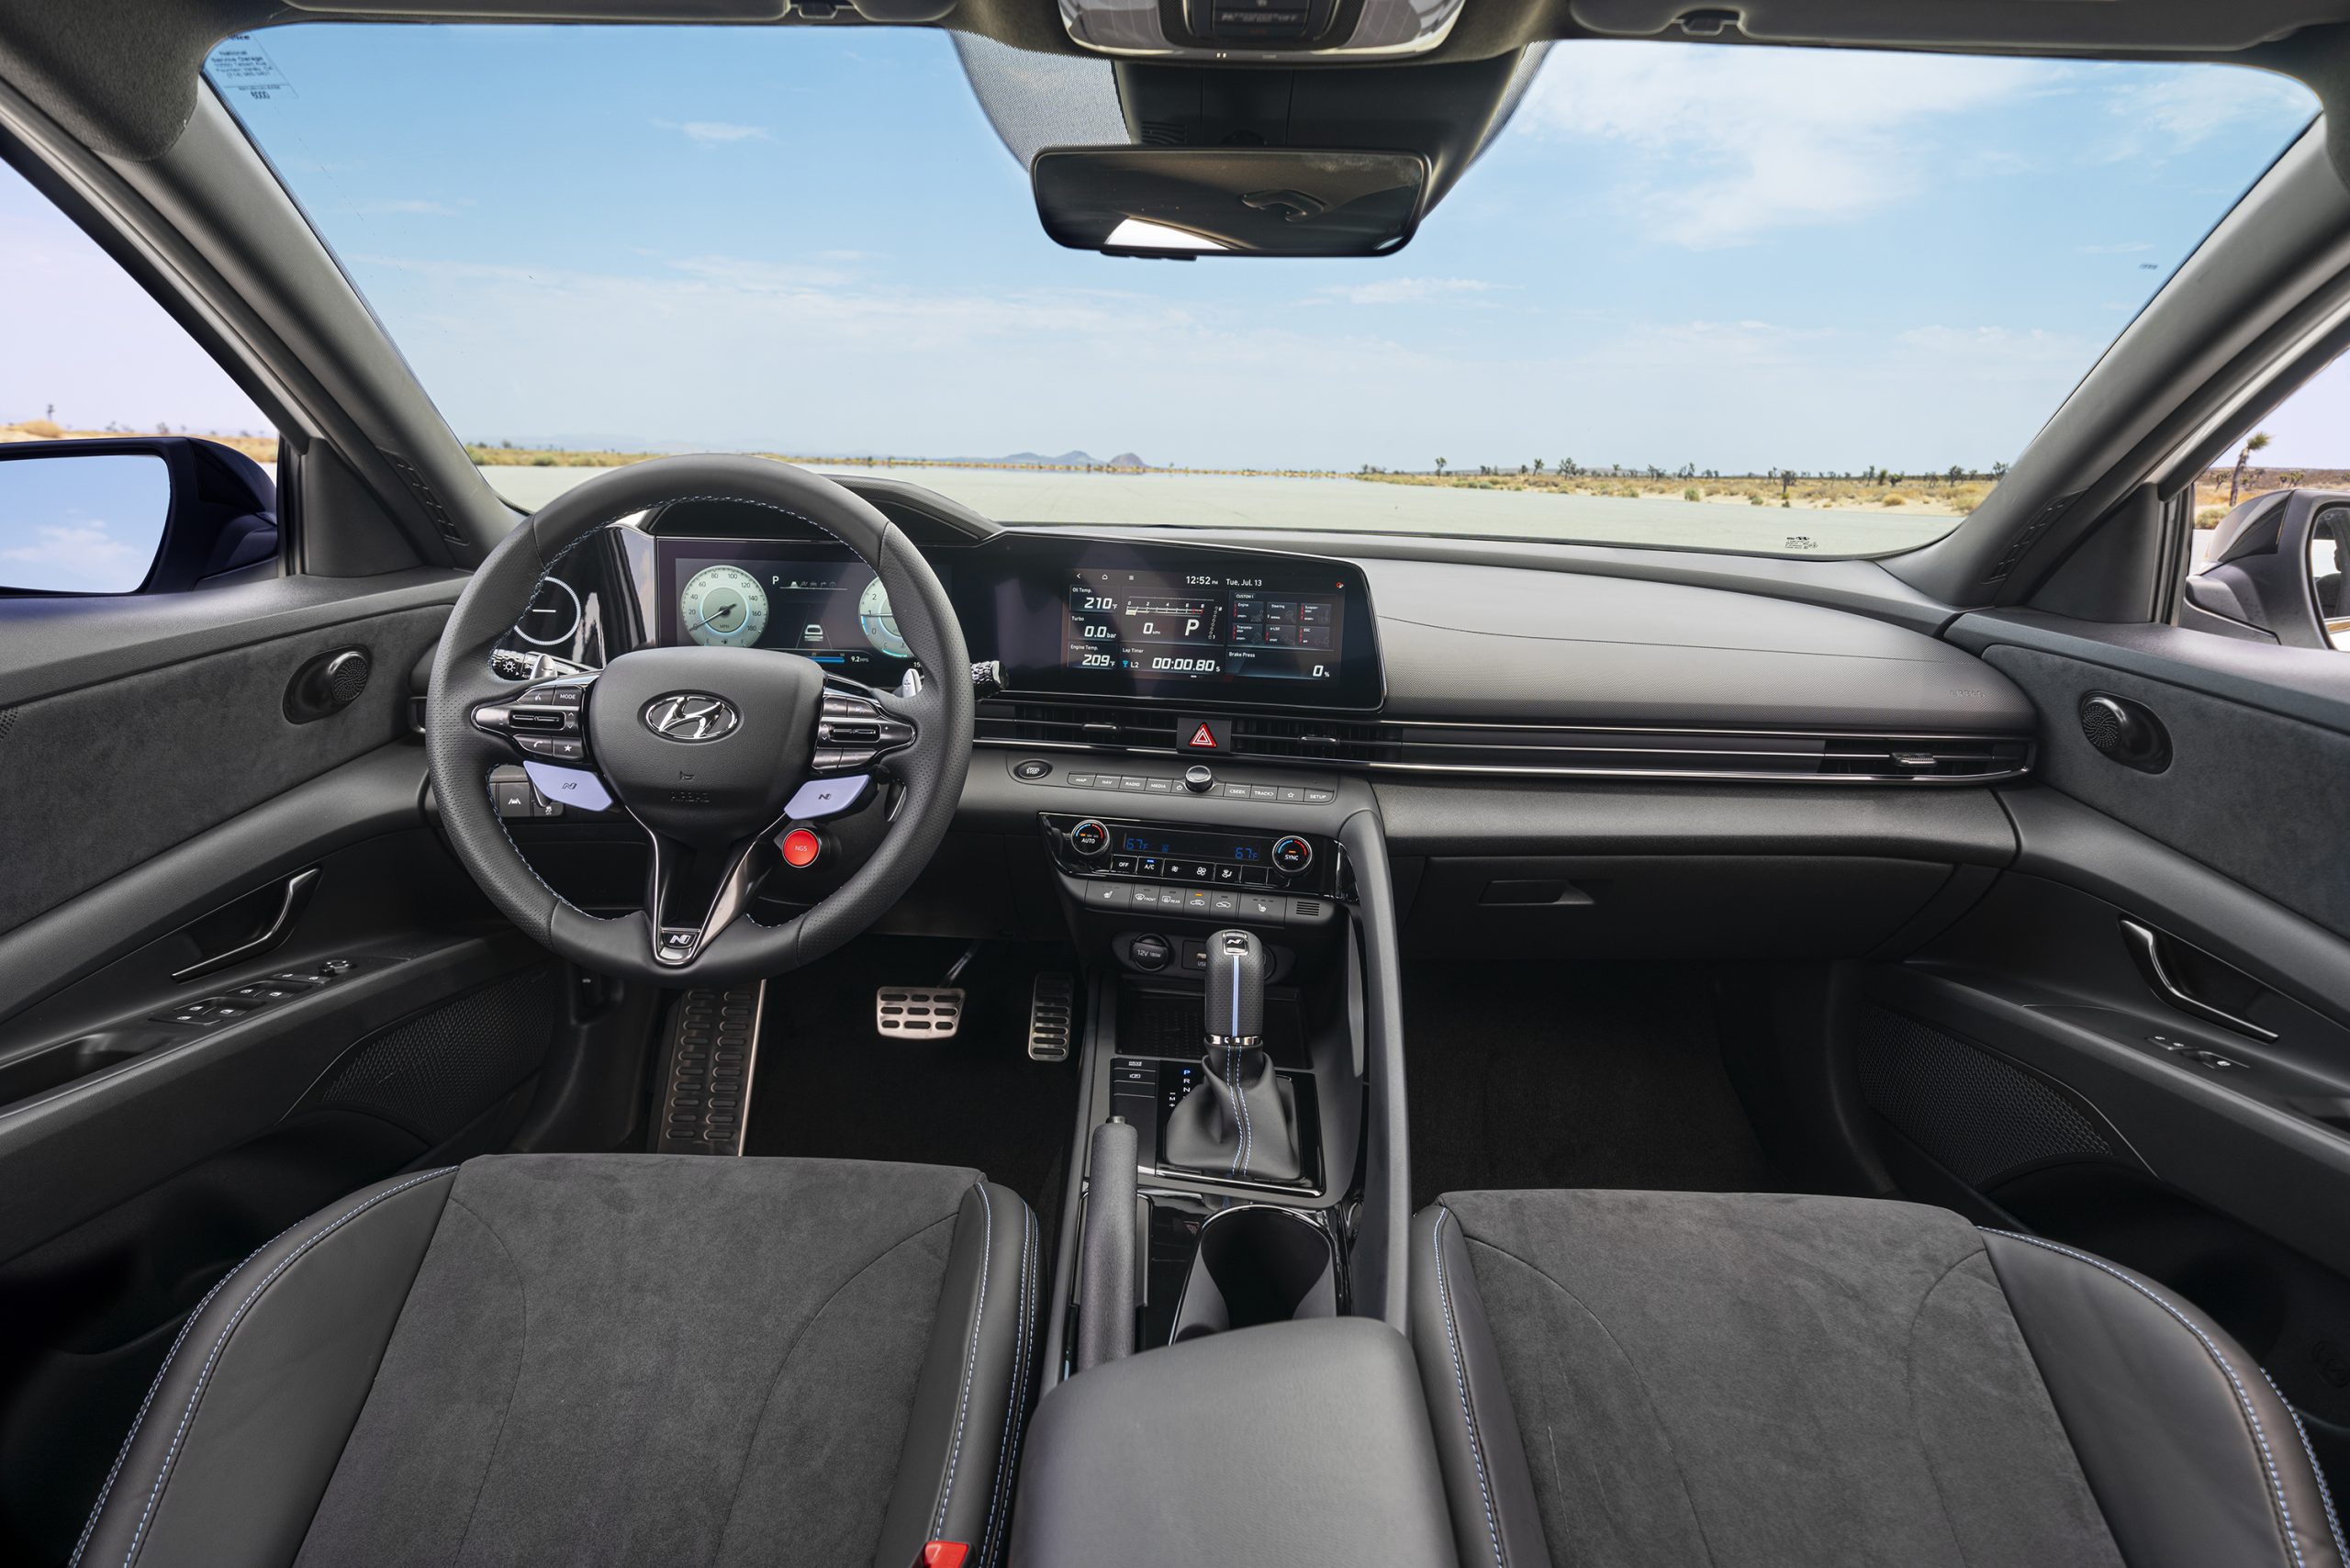 The black and pale blue interior of the 2022 Elantra N with a dual-clutch transmission instead of the standard manual transmission.